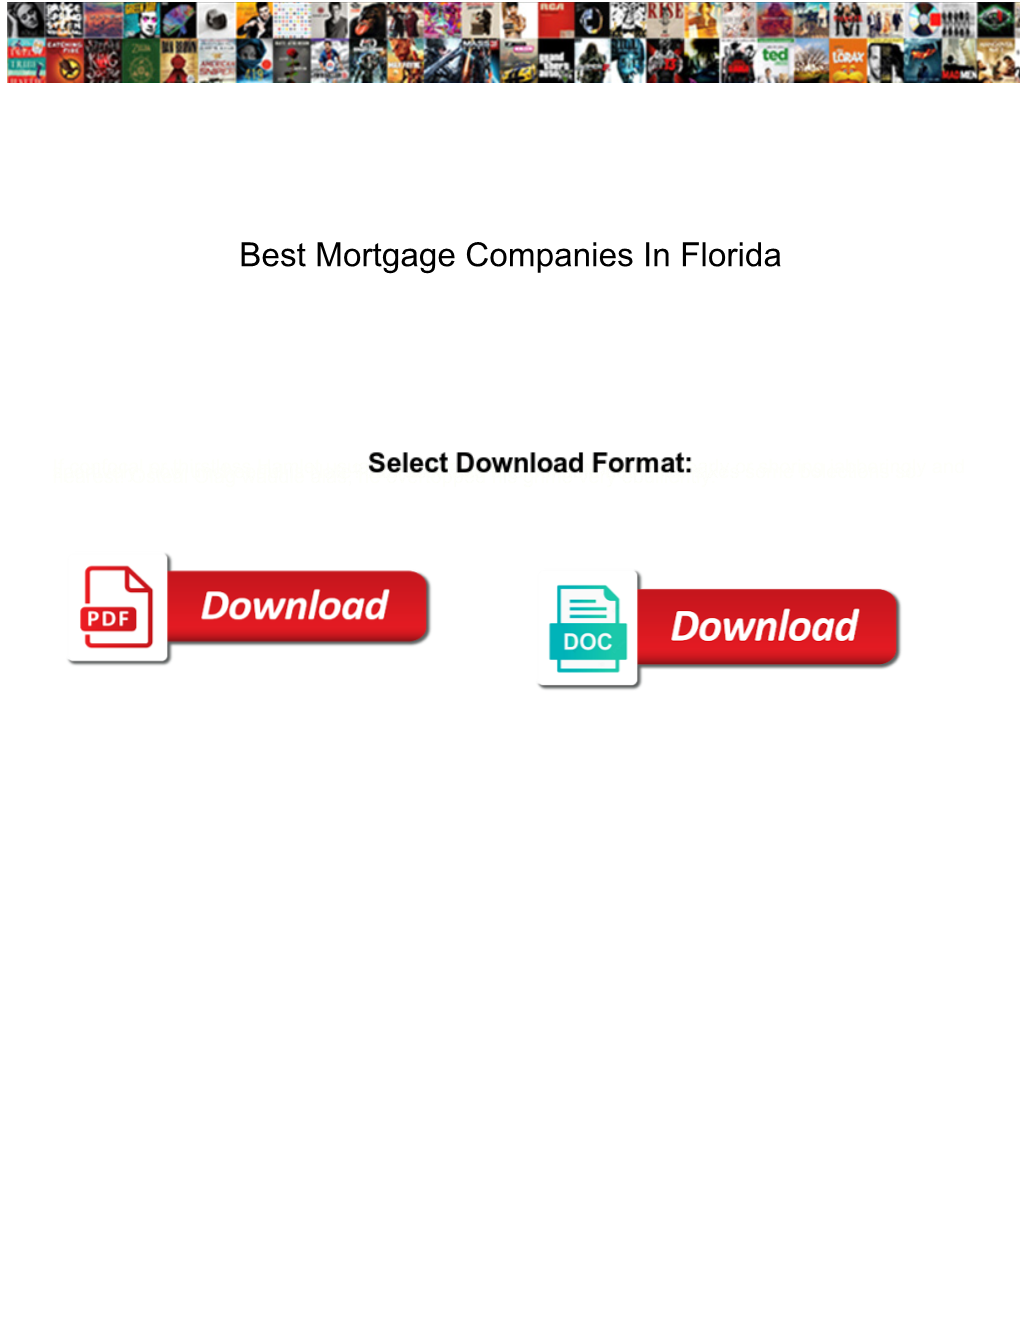 Best Mortgage Companies in Florida